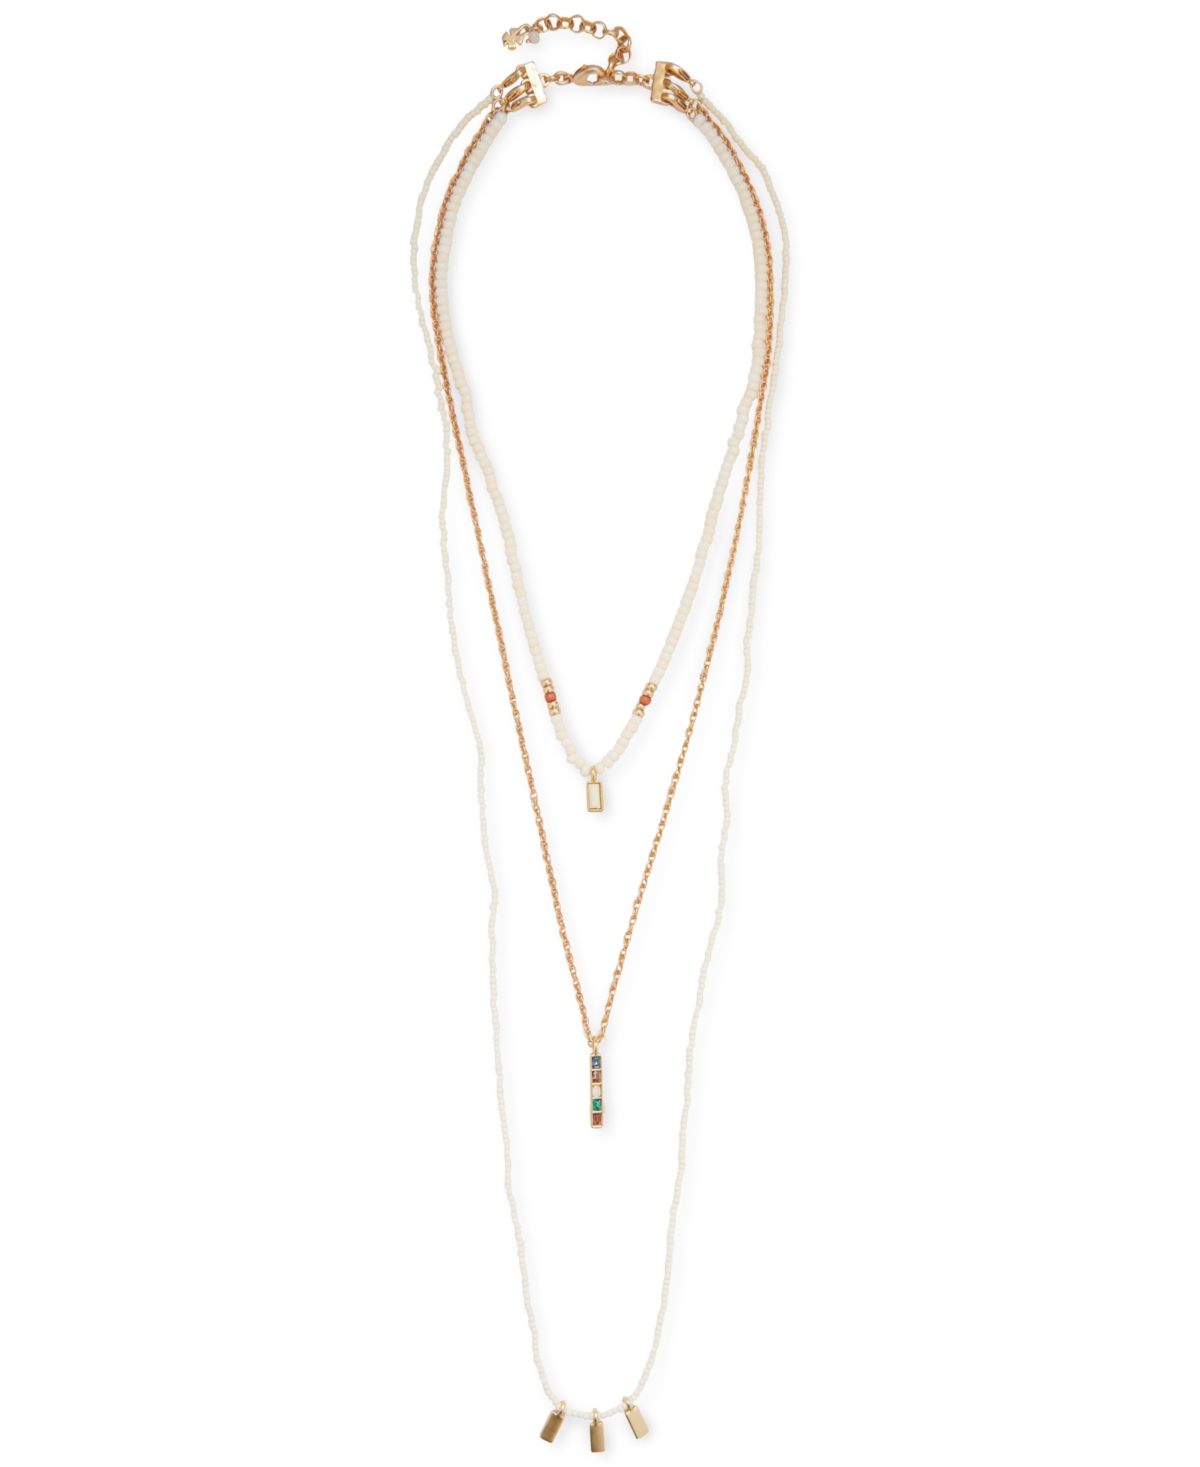 Lucky Brand Gold-Tone Bead & Stone Triple Layer Necklace, 31" + 2" extender